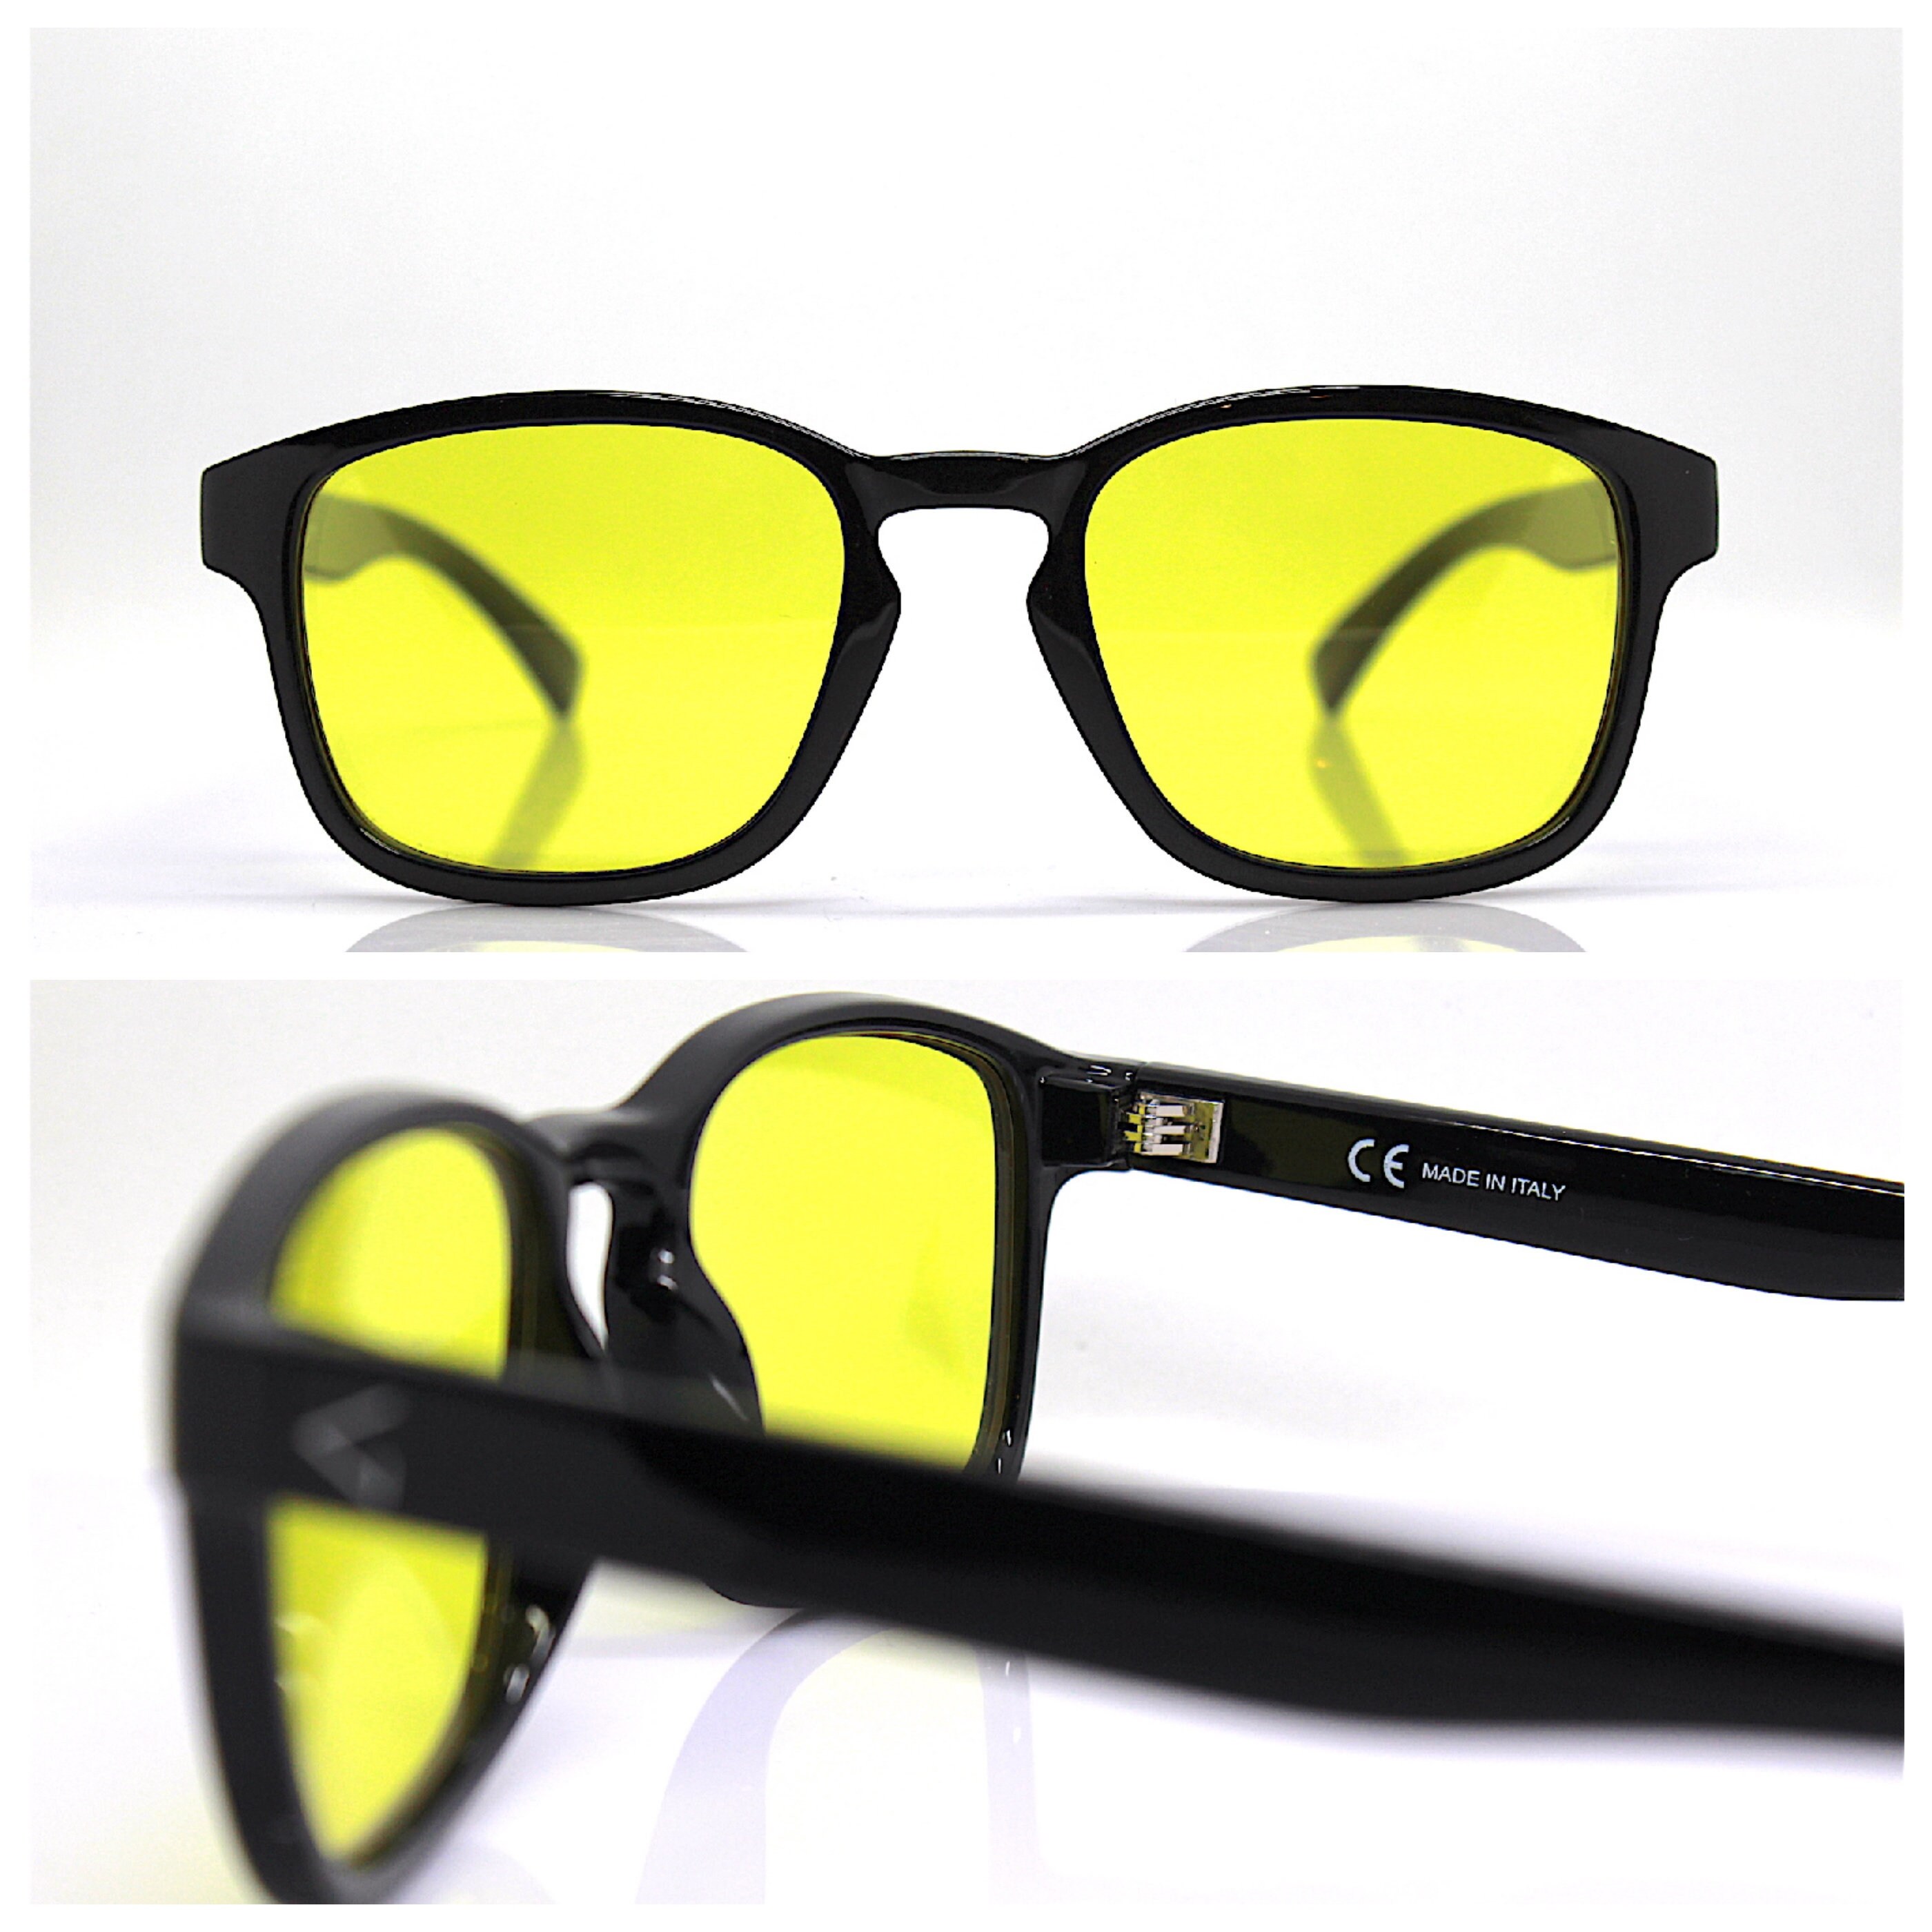 MADE IN ITALY square classic sunglasses man black frame yellow lens ...